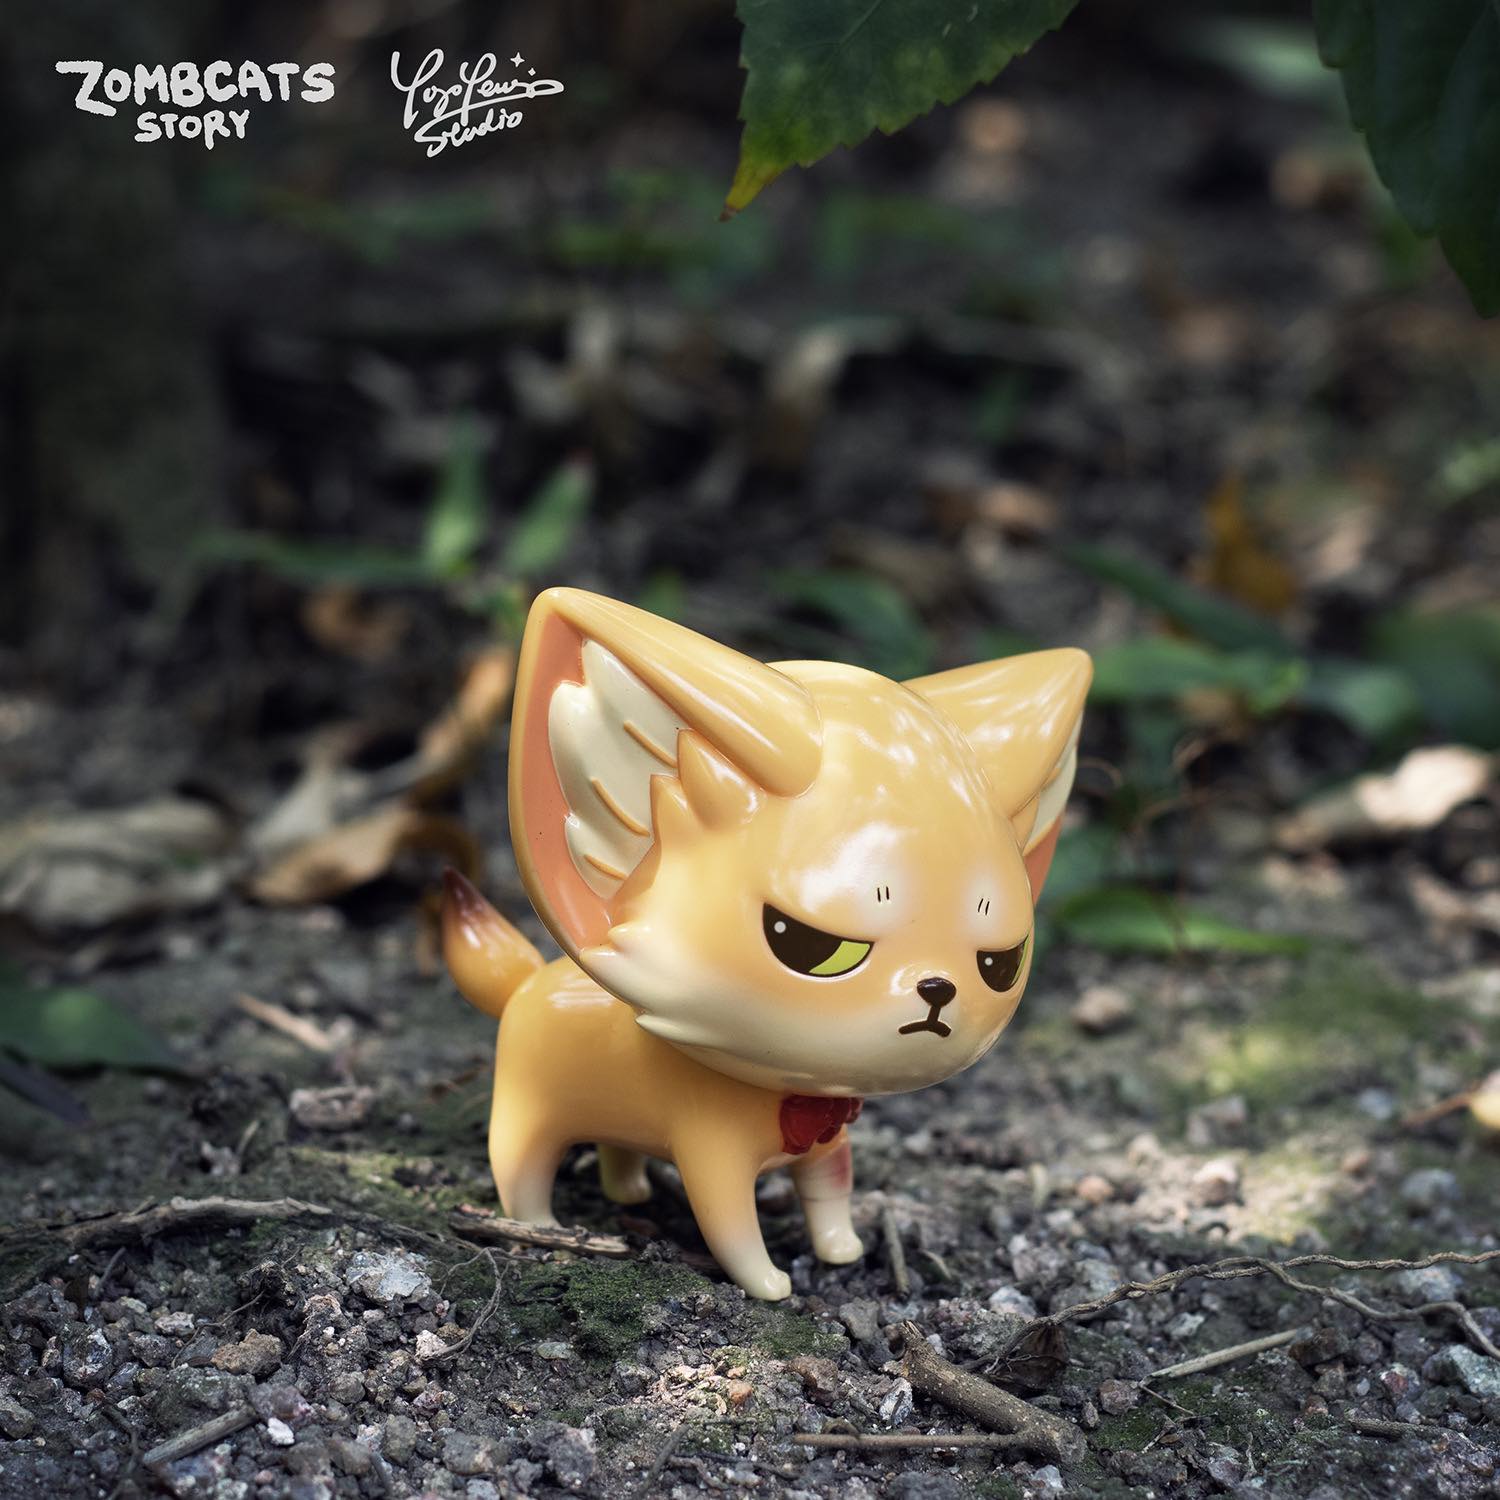 A limited edition Zombcat toy by Morimei X Yoyo Yeung Studio, featuring Doomsday Fox Kenneth. Soft vinyl, 7cm, outdoor-themed. From Strangecat Toys.